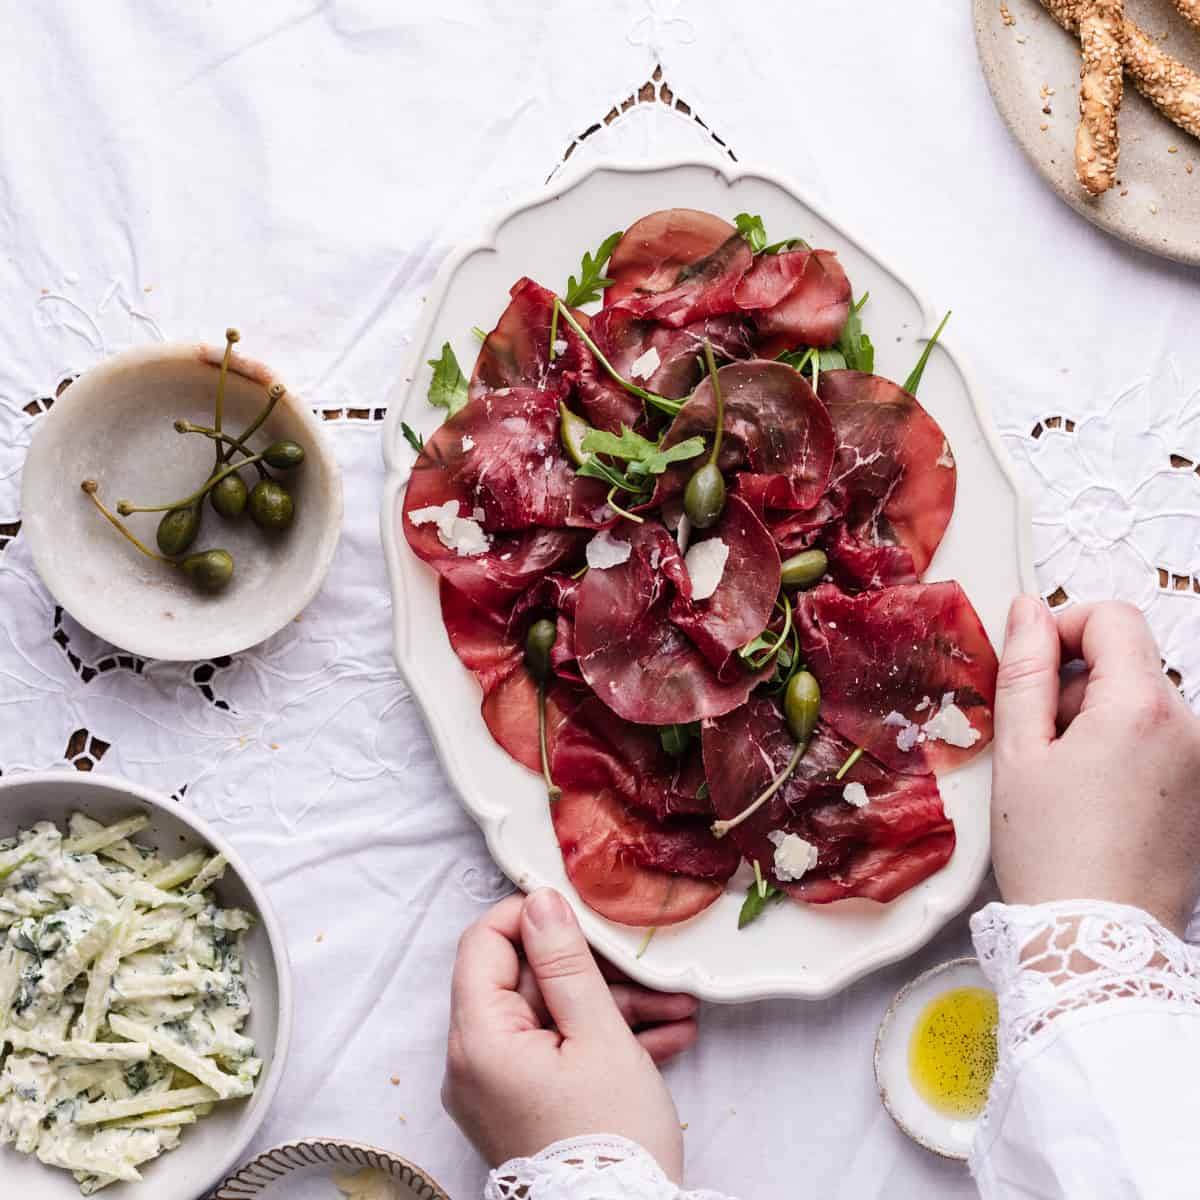 Bresaola di carpaccio in a serving dish with hand holding it